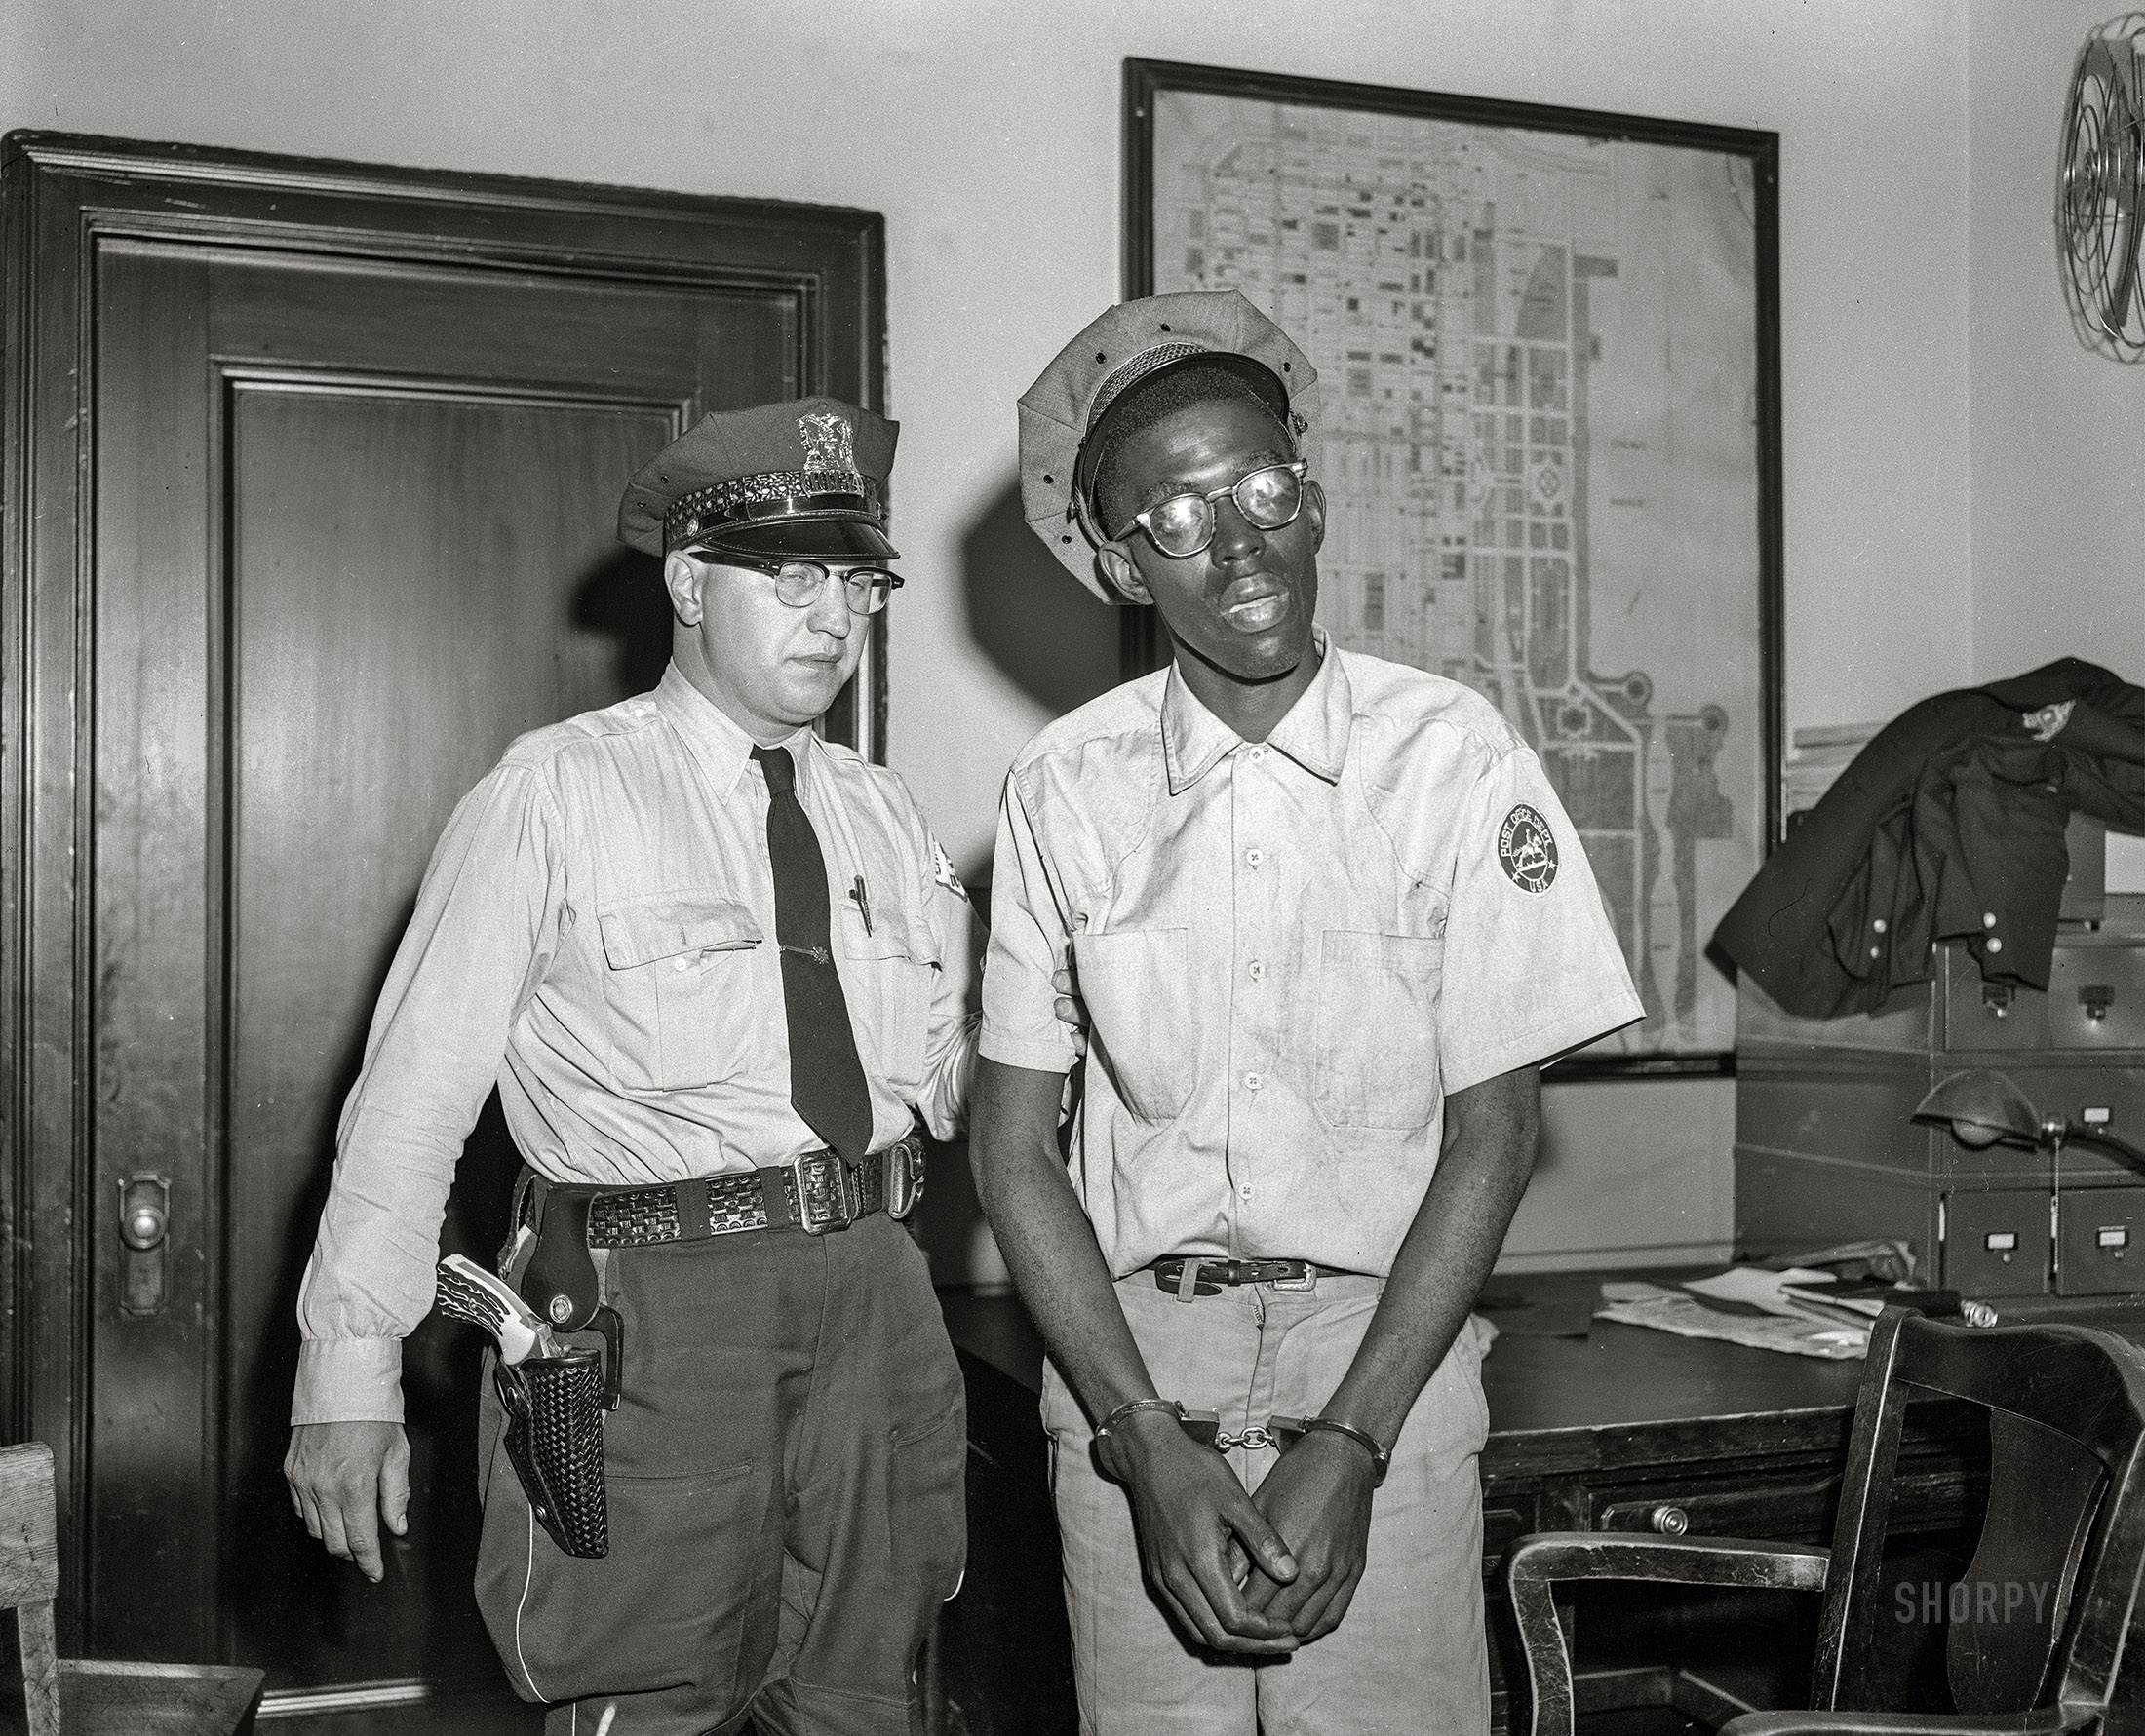 Here we are in circa 1953 Chicago with a Post Office employee under arrest. Do Not Fold, Spindle or Mutilate, or else! 4x5 acetate negative from the News Photo Archive. View full size.